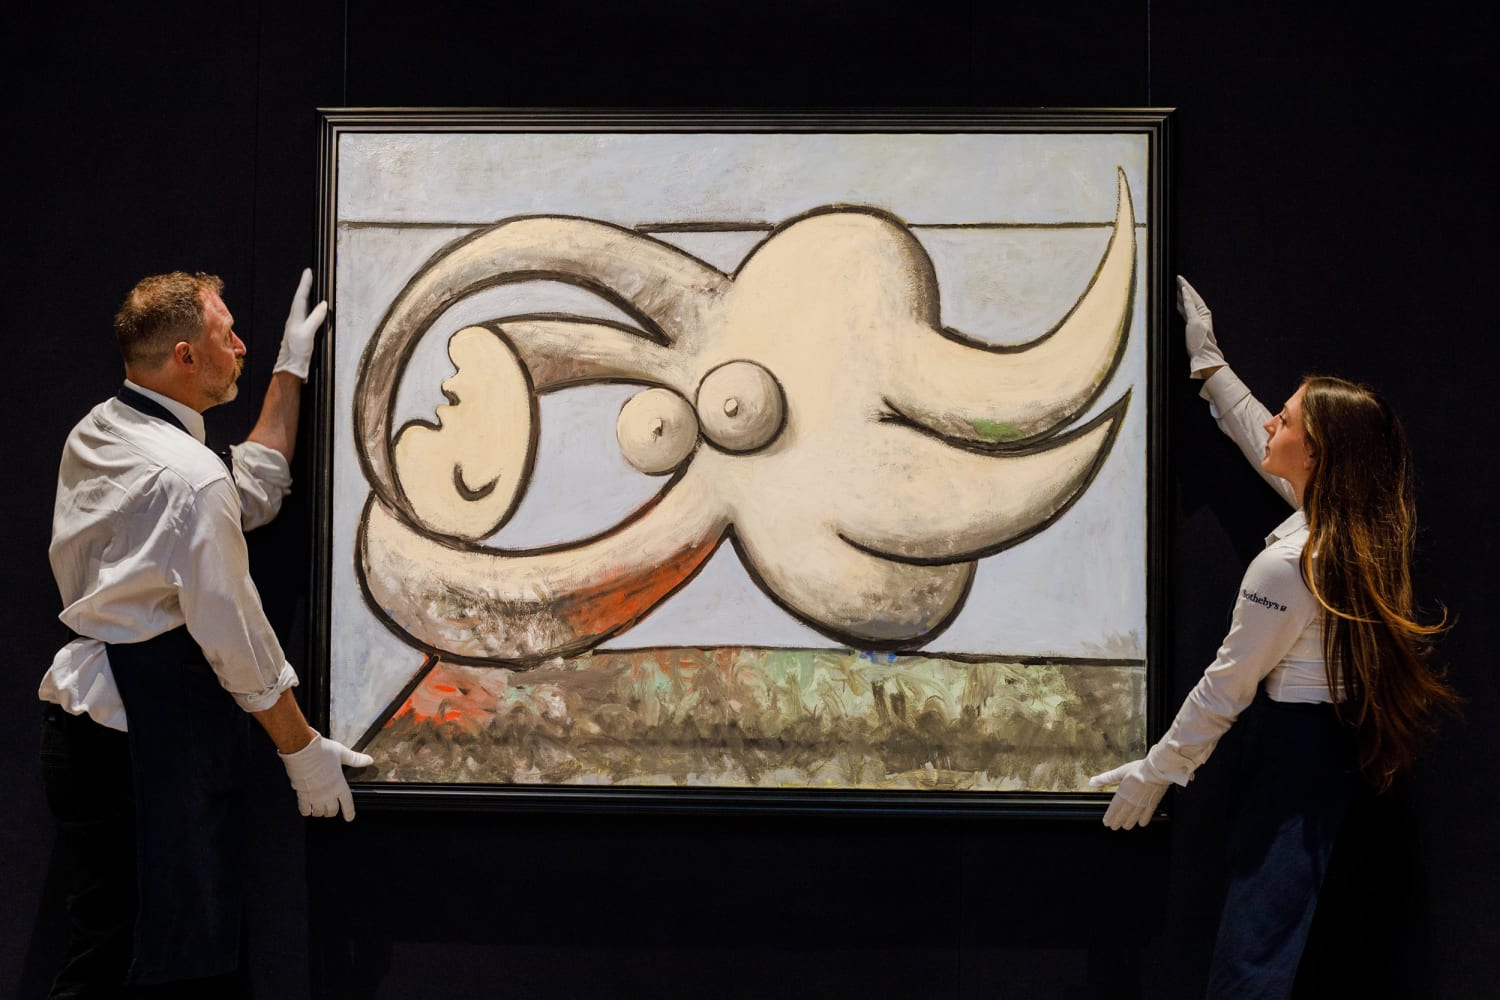 Picasso-portrait-of-lover-as-a-sea-creature-sells-for-$67.5M-in-New-York-auction